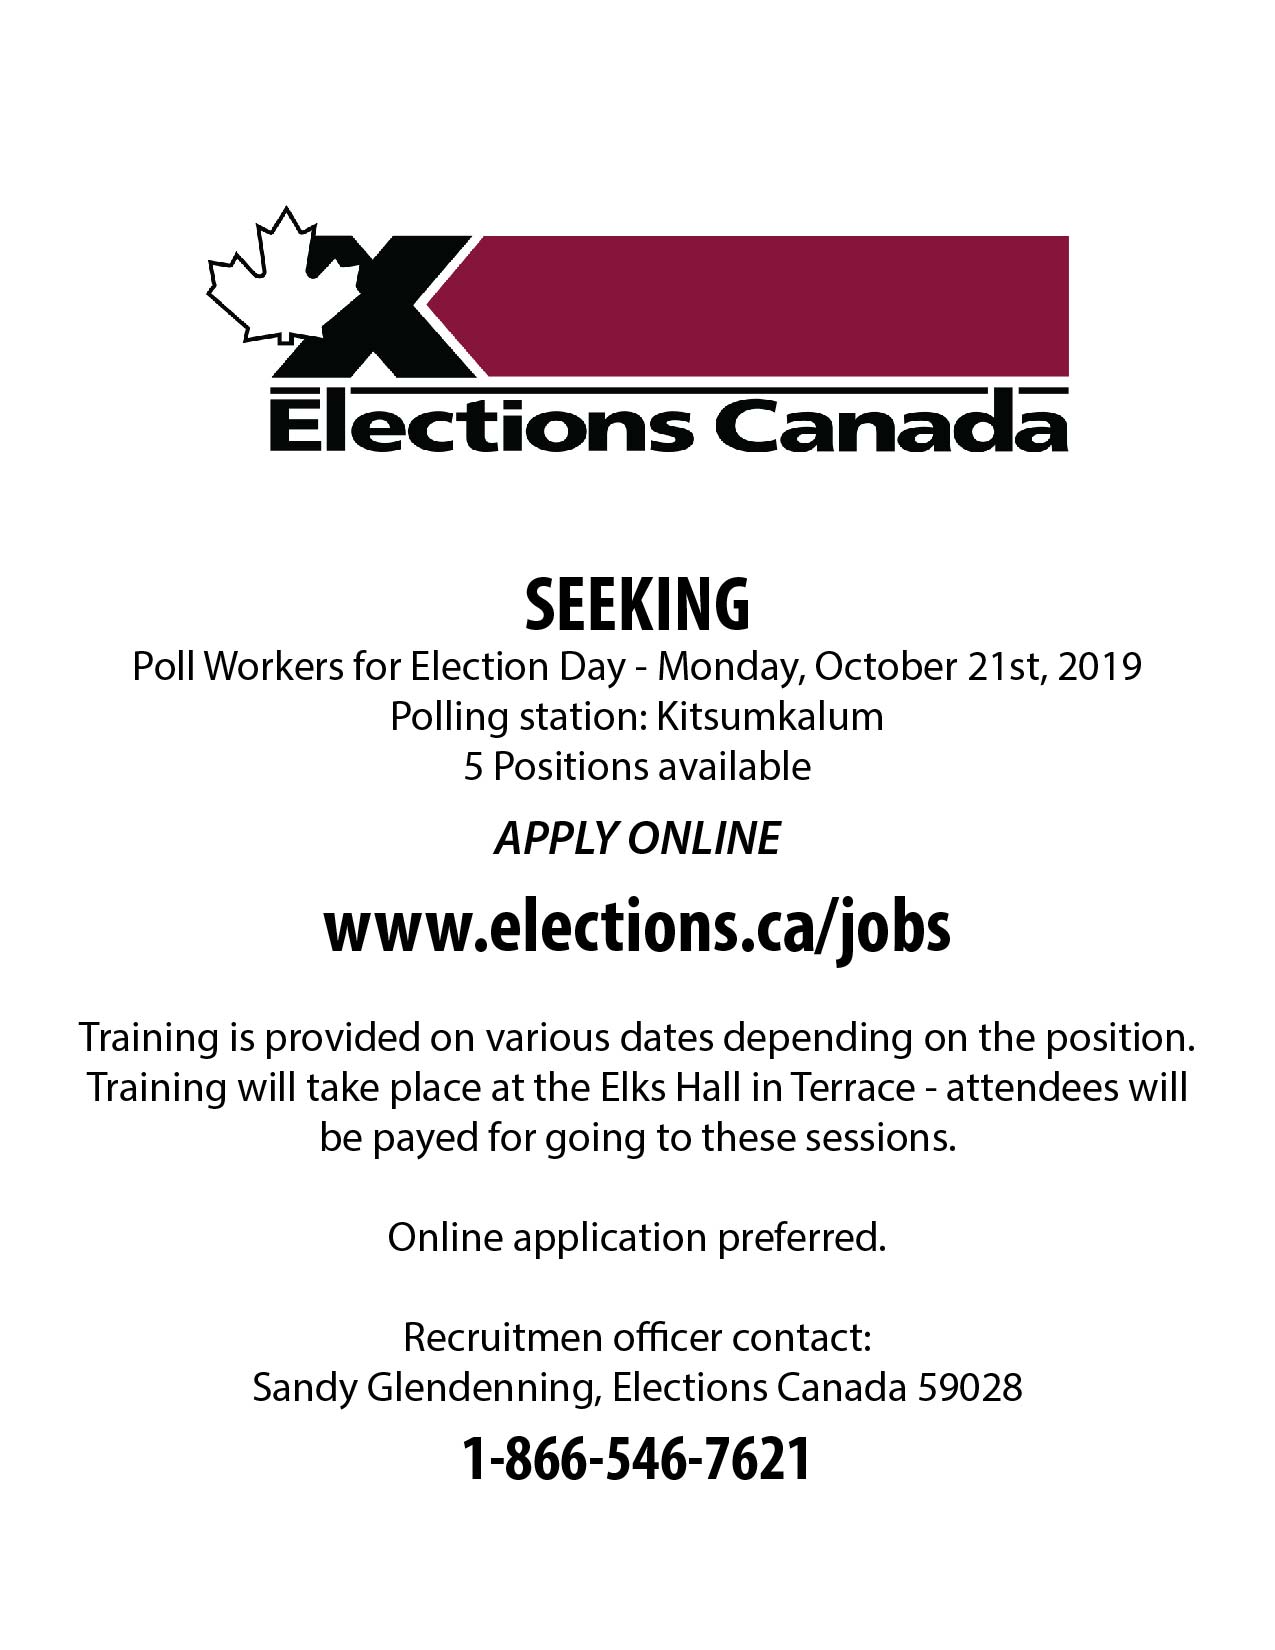 Elections Canada Seeking Poll Workers